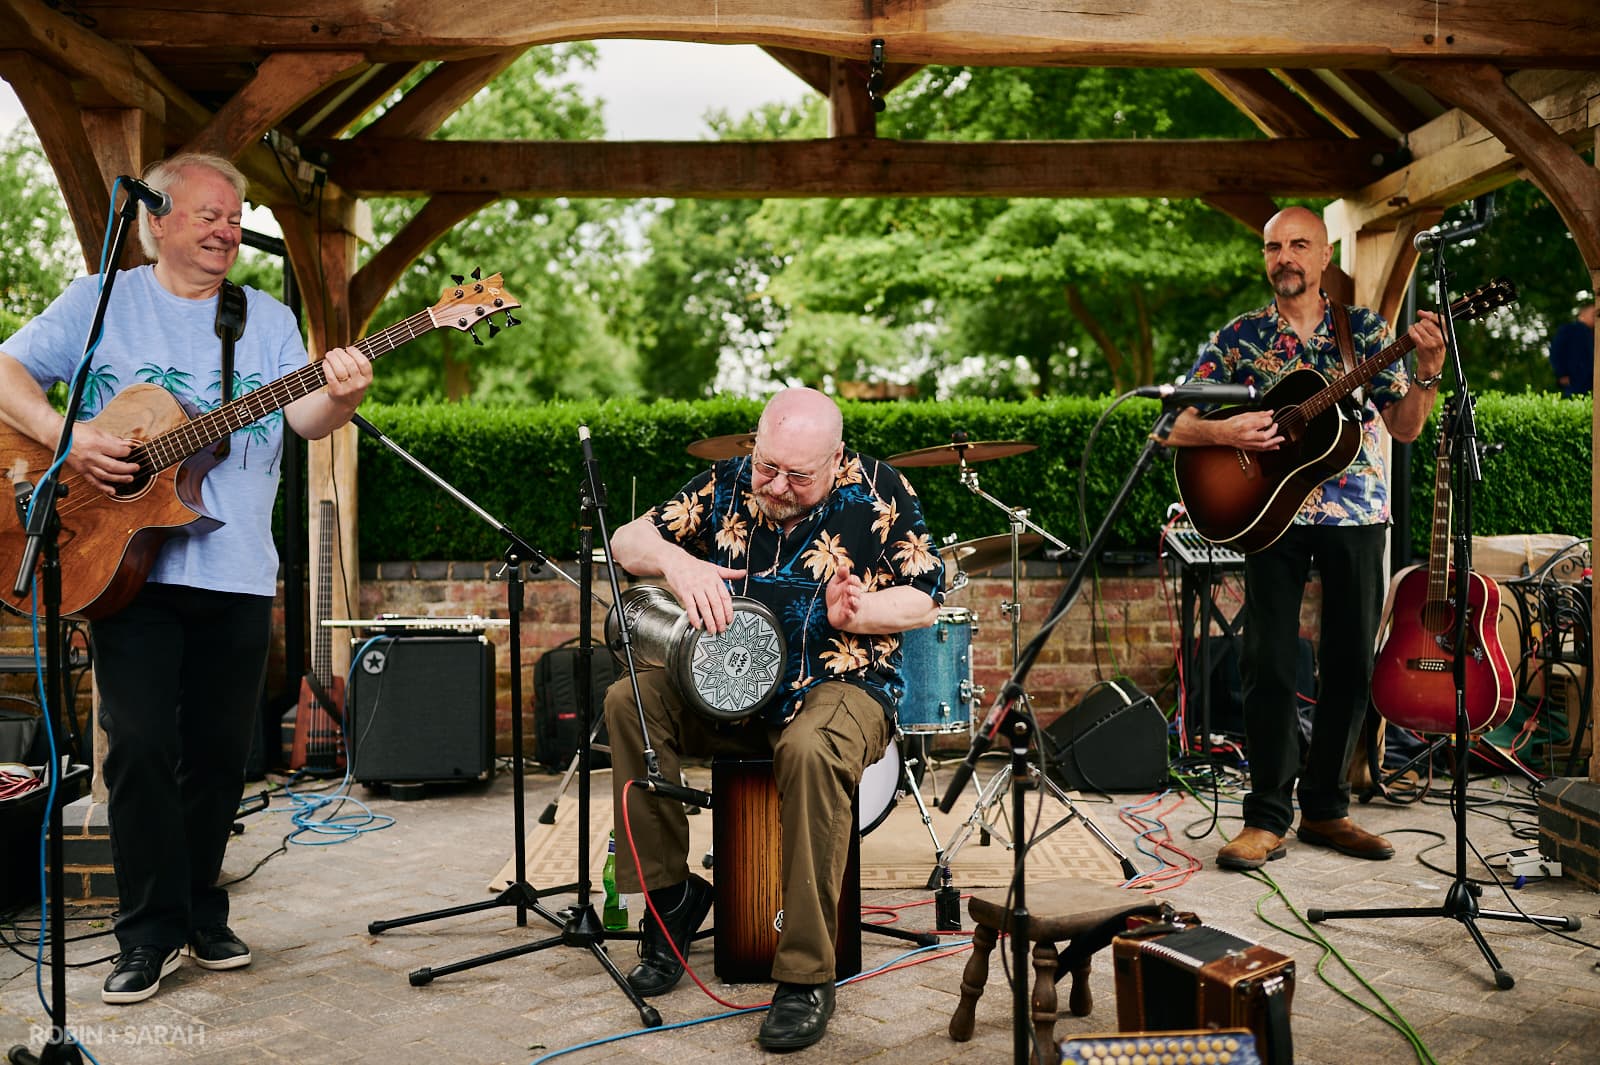 Ceilidh band play outside at Wethele Manor